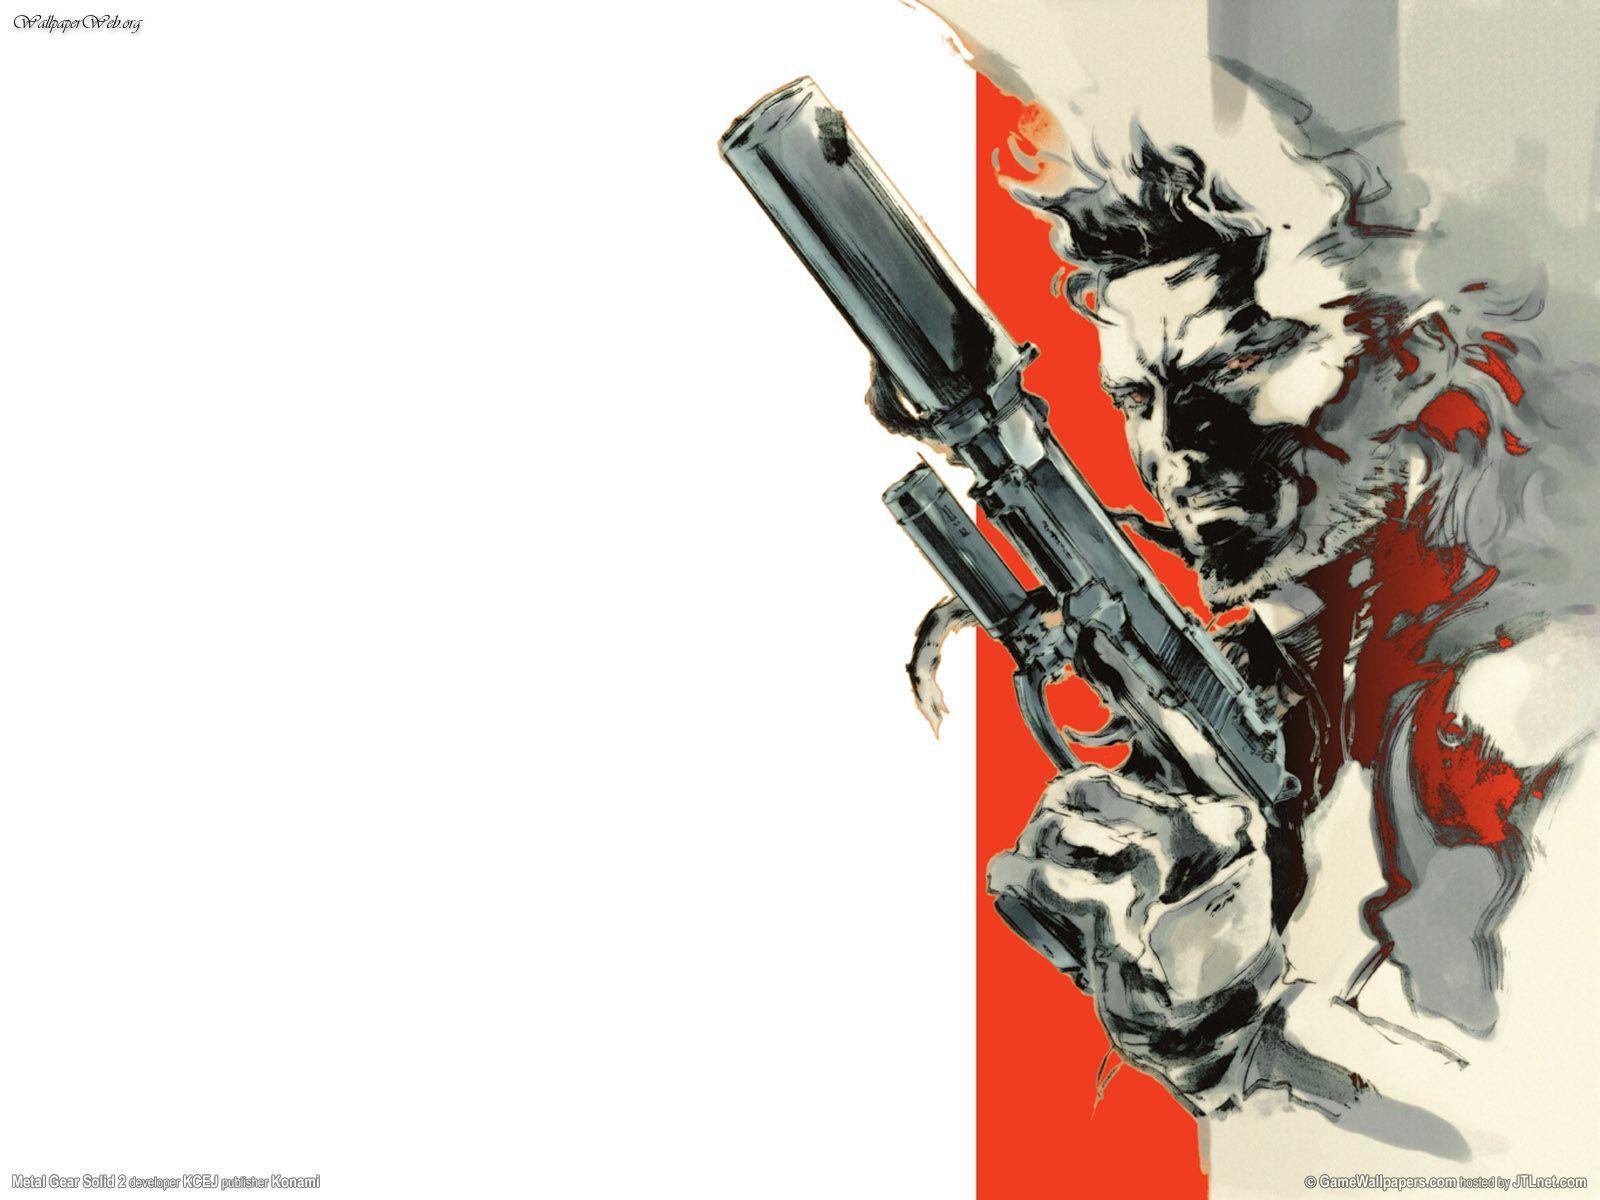 Games: Metal Gear Solid 2: Sons of Liberty, picture nr. 29954